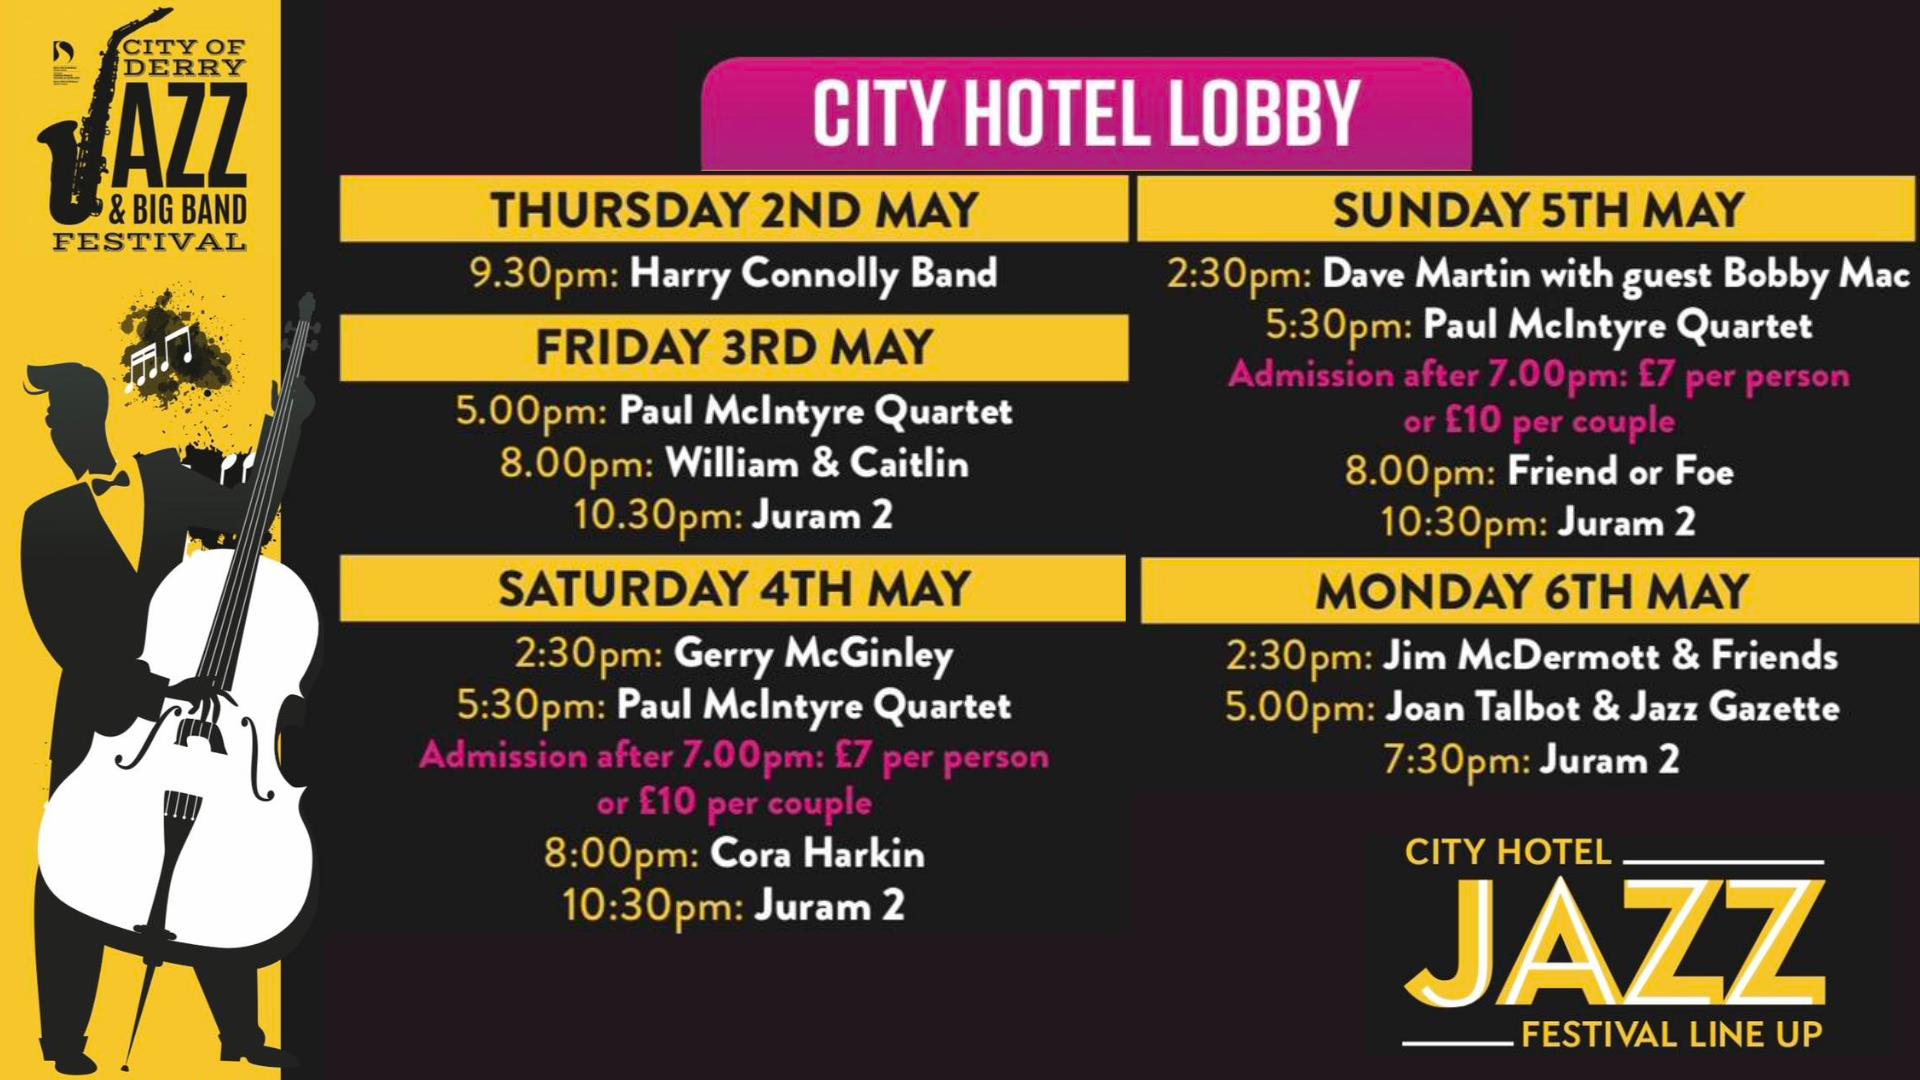 Promotion image for the Jazz Festival lineup in the City Hotel Lobby.